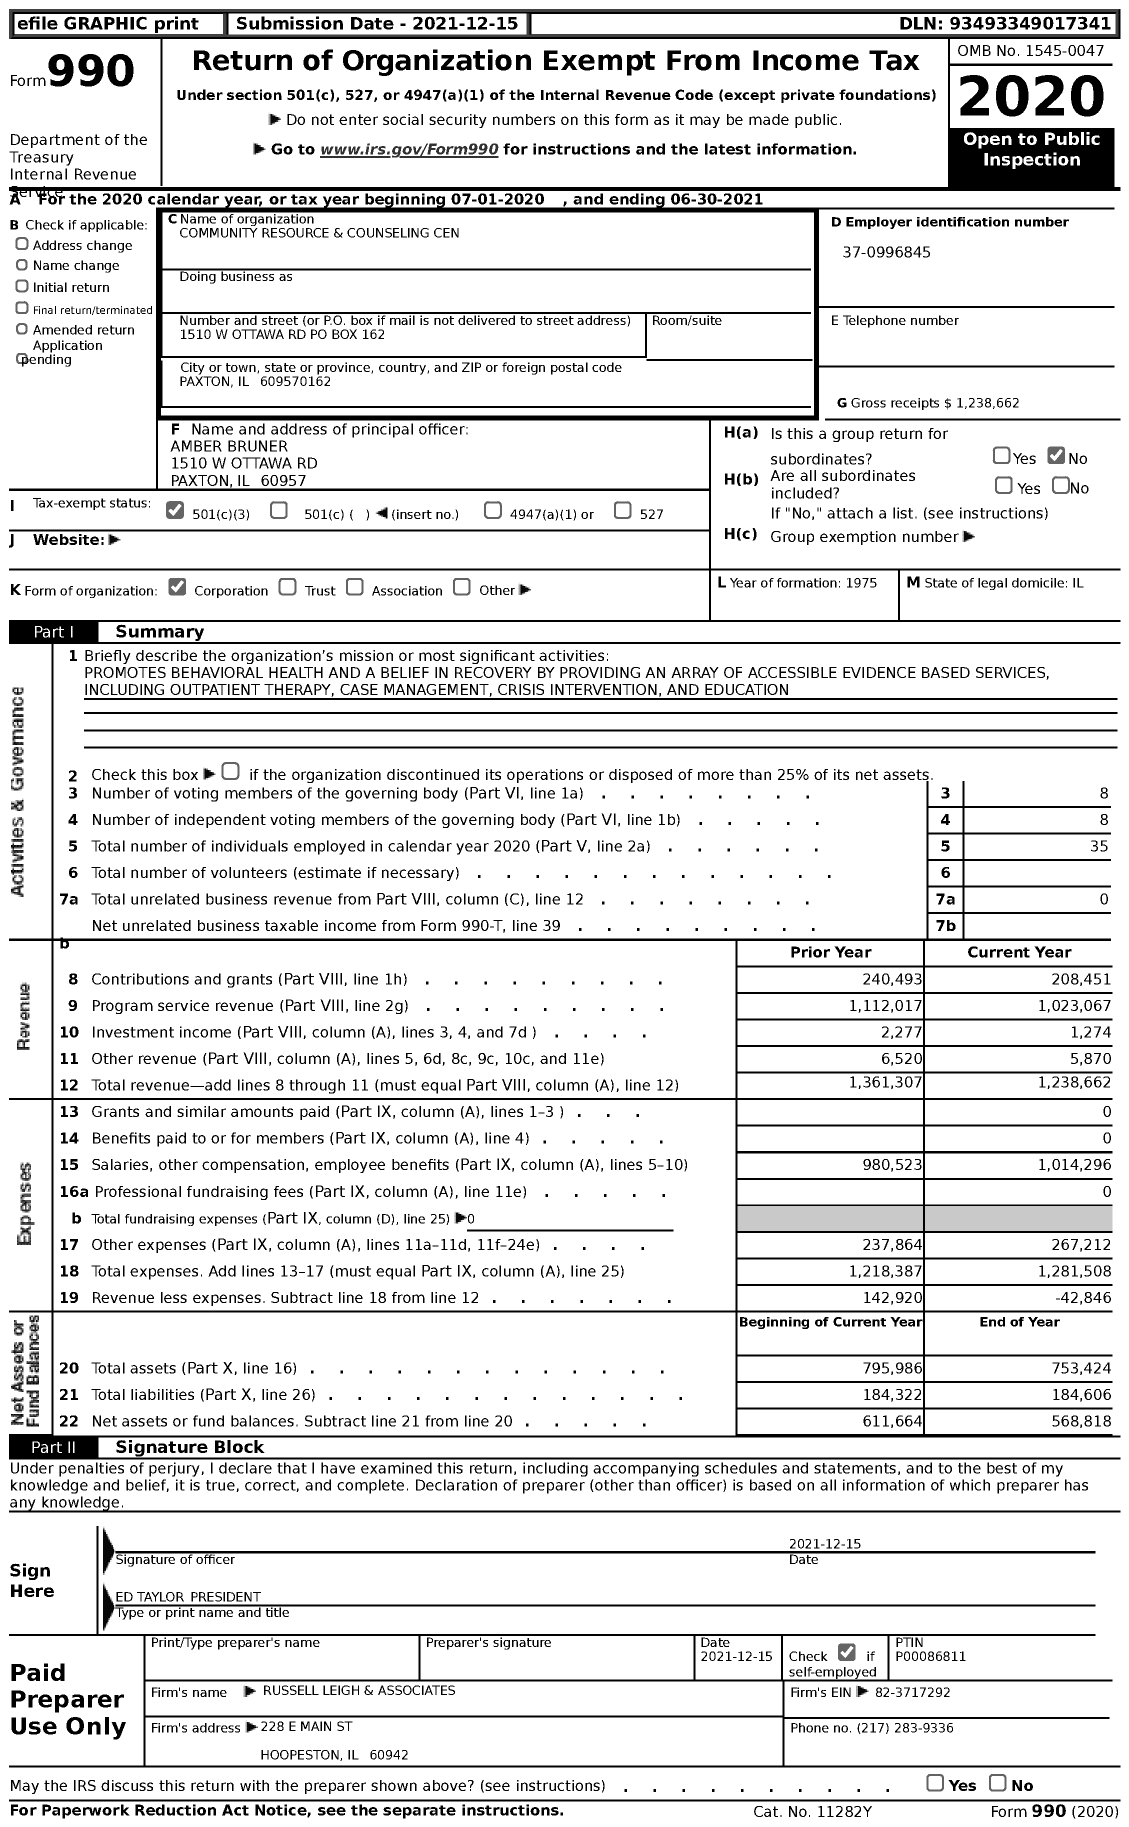 Image of first page of 2020 Form 990 for Community Resource and Counseling Cen